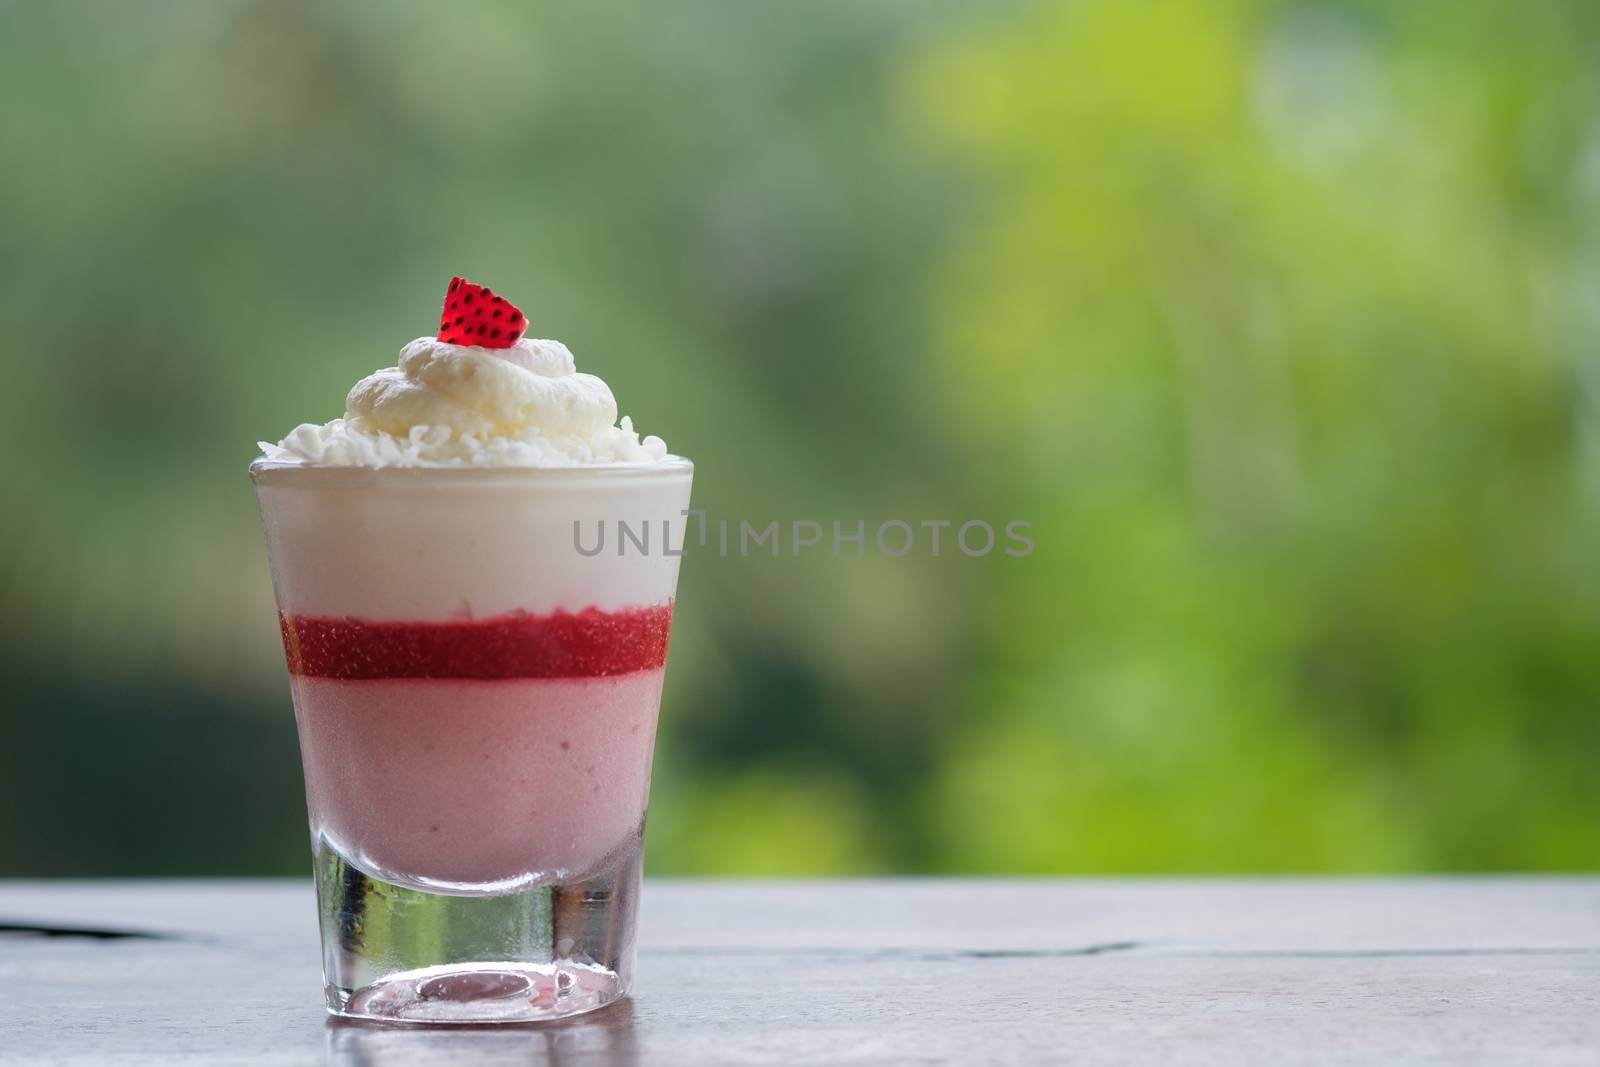 Strawberry mousse cake in a small glass placed on a wooden table in bokeh background with copy space.